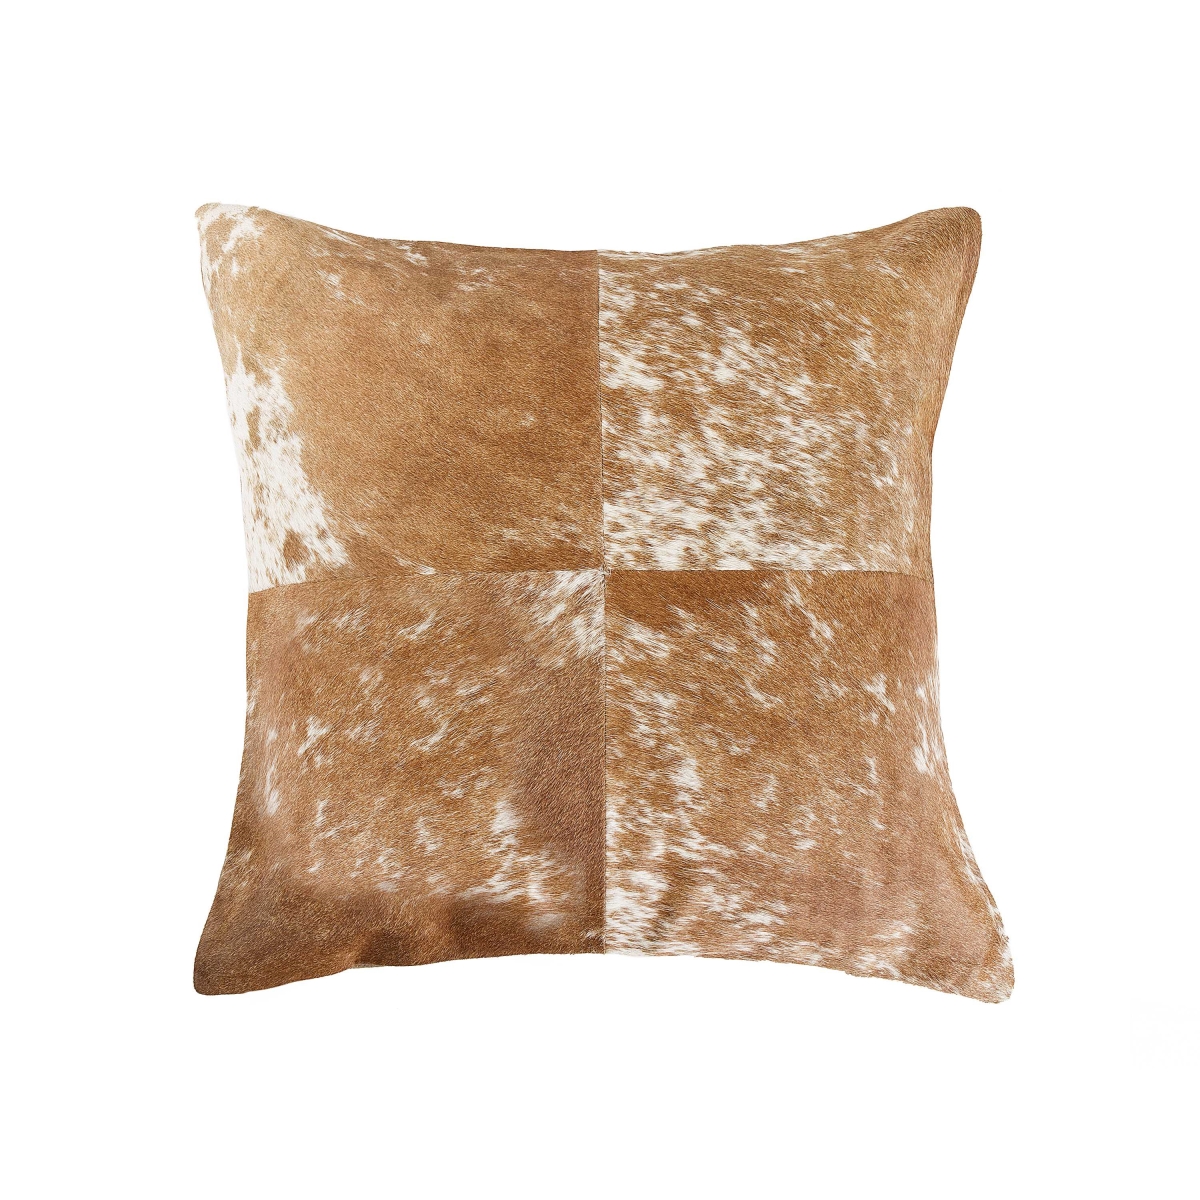 Home Roots Beddings 332233 Salt & Pepper Quattro Pillow, Brown & White - 18 X 18 In.